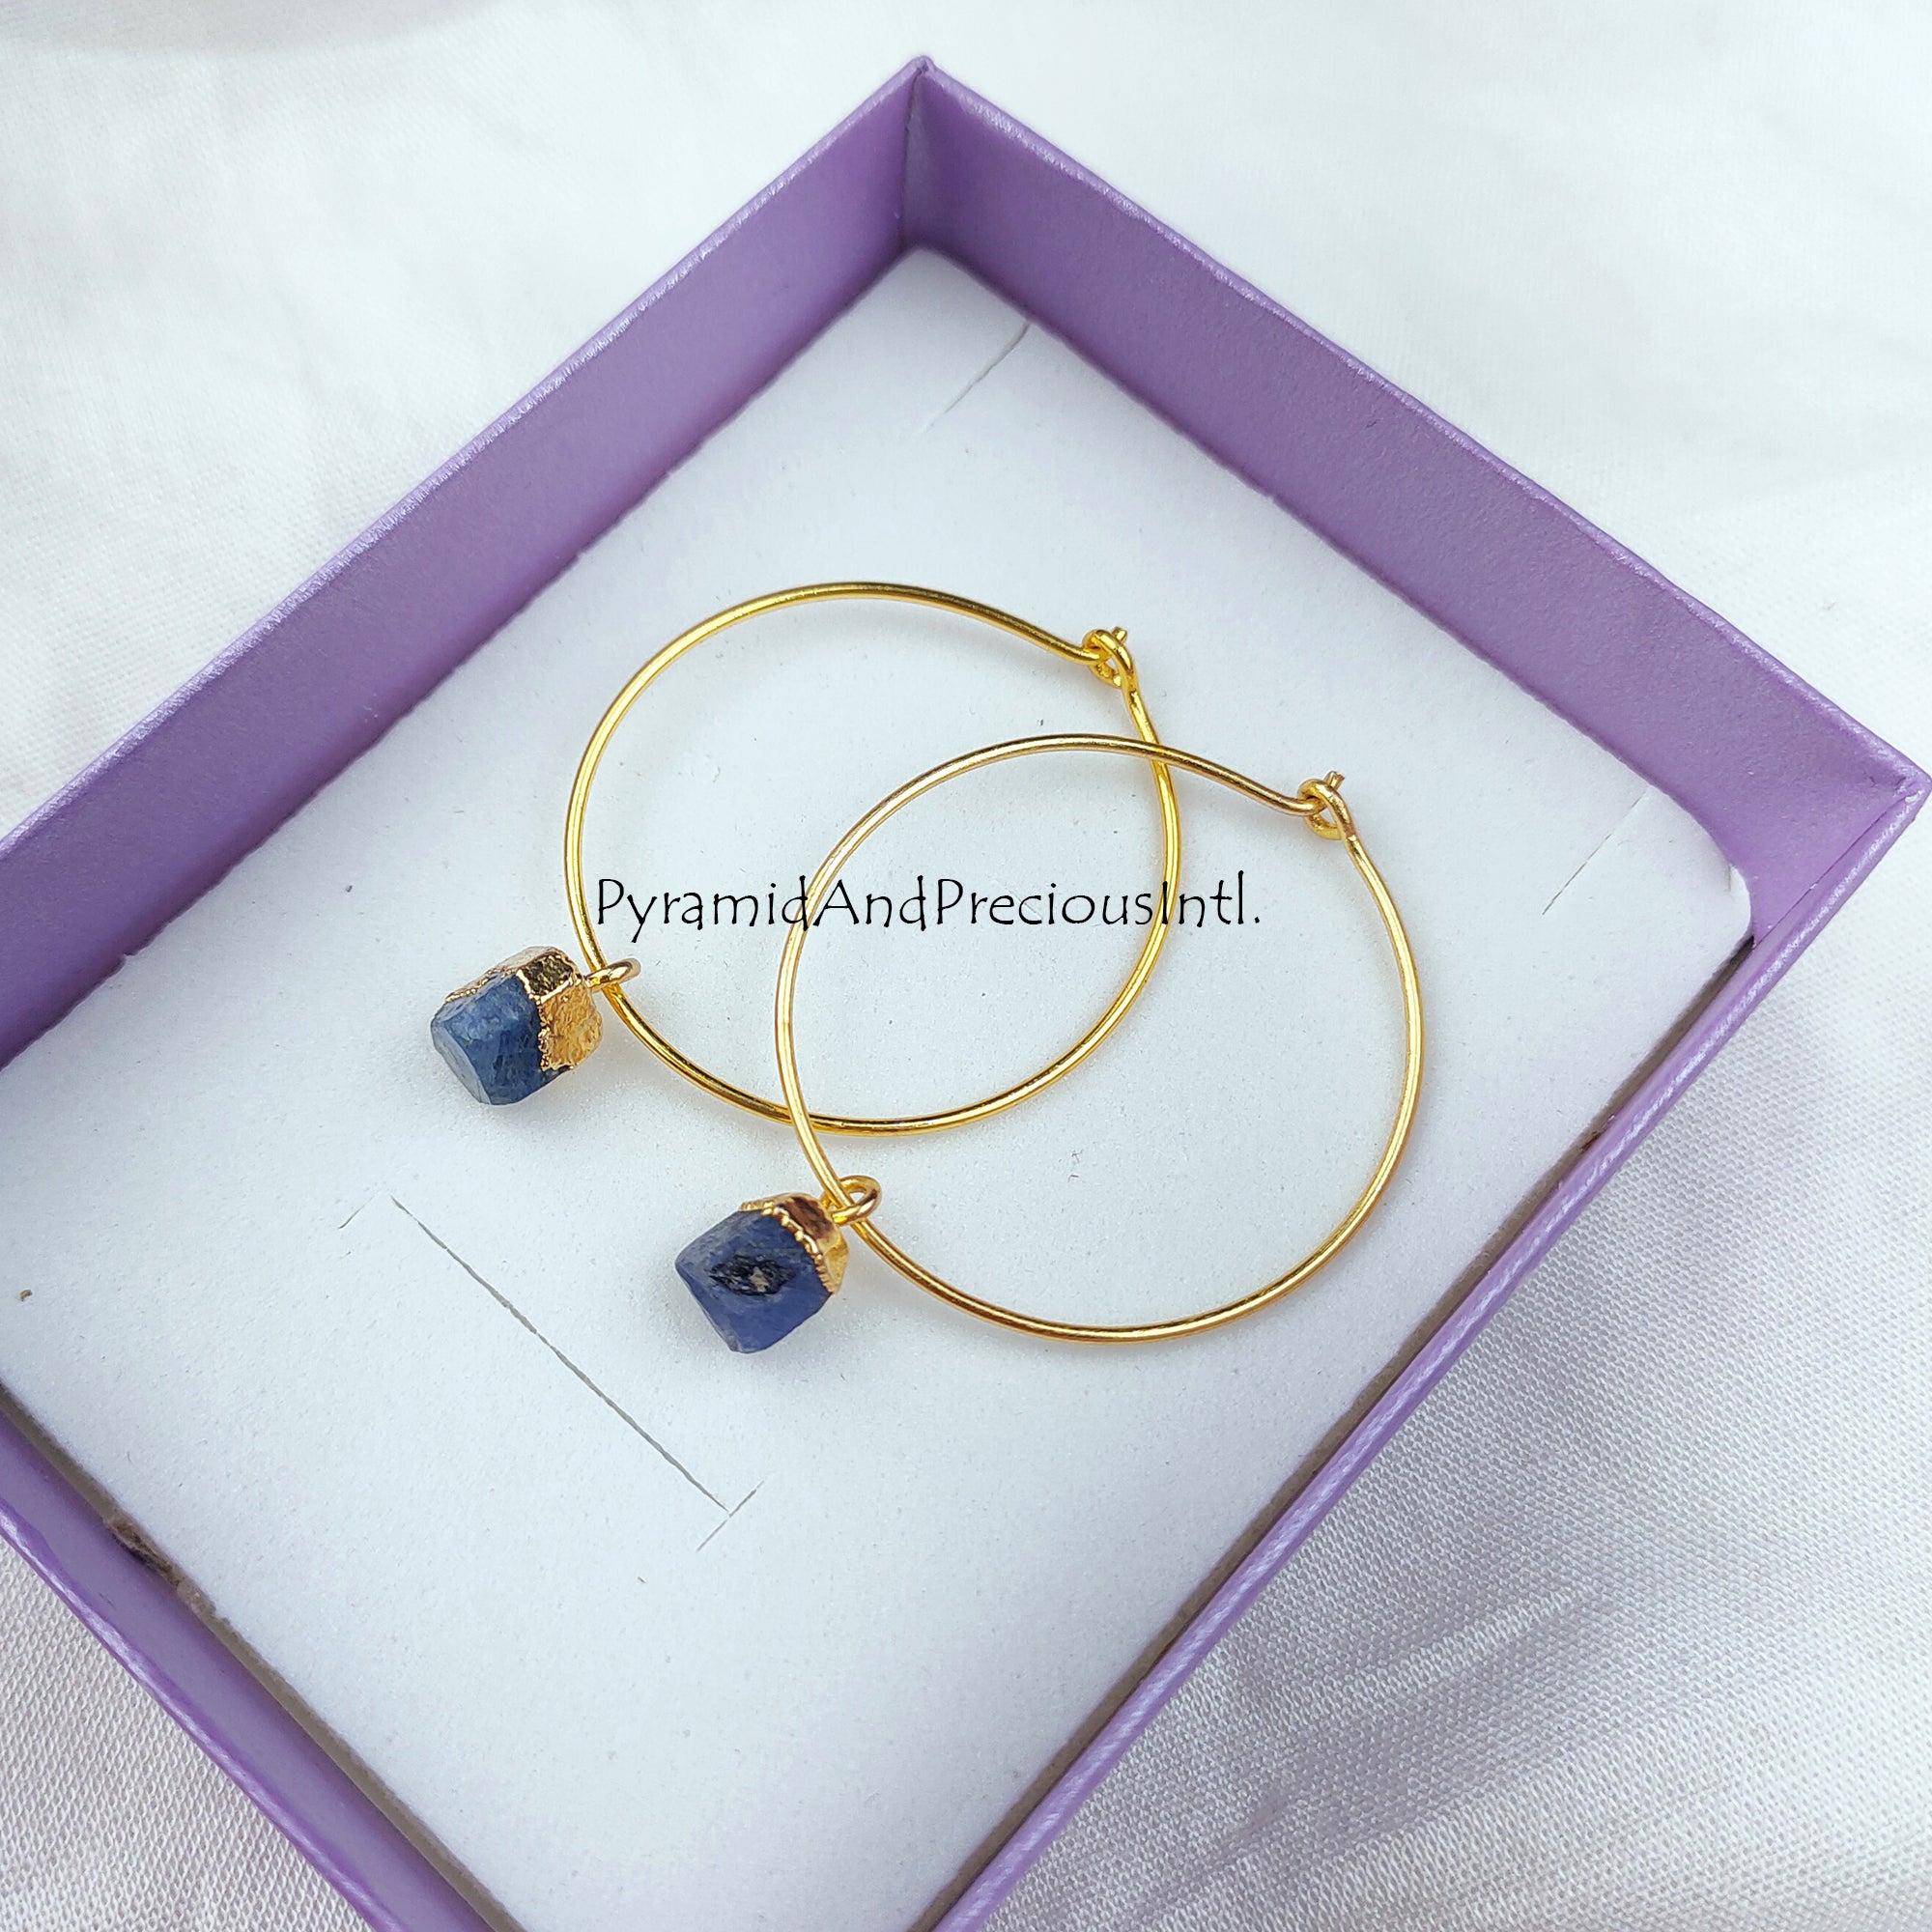 Rough Sapphire Earrings, Sapphire Drop Earrings, Electroplated Natural Sapphire Earrings, September Birthday